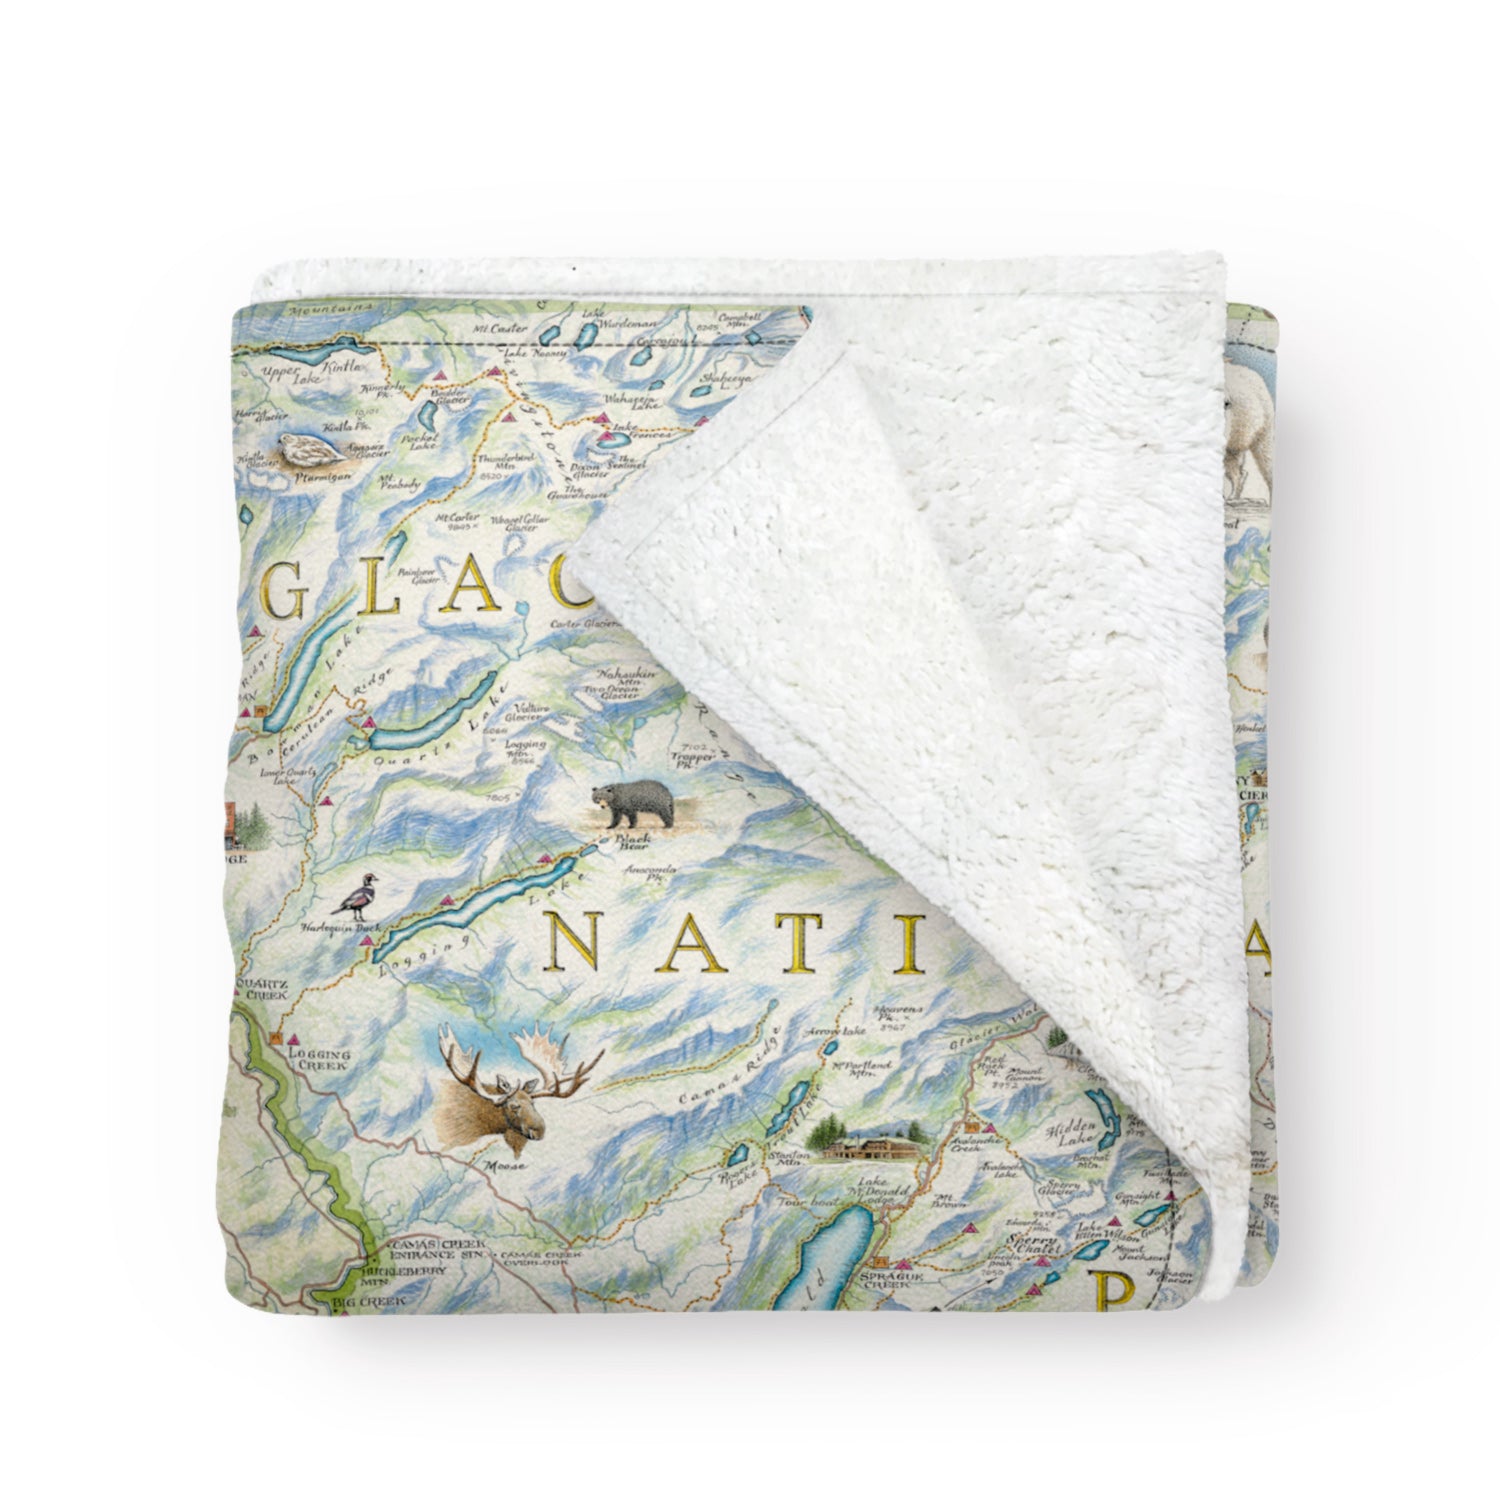 A folded blanket with a map of Glacier National Park on it. Hand-drawn artwork. Blanket measures 58